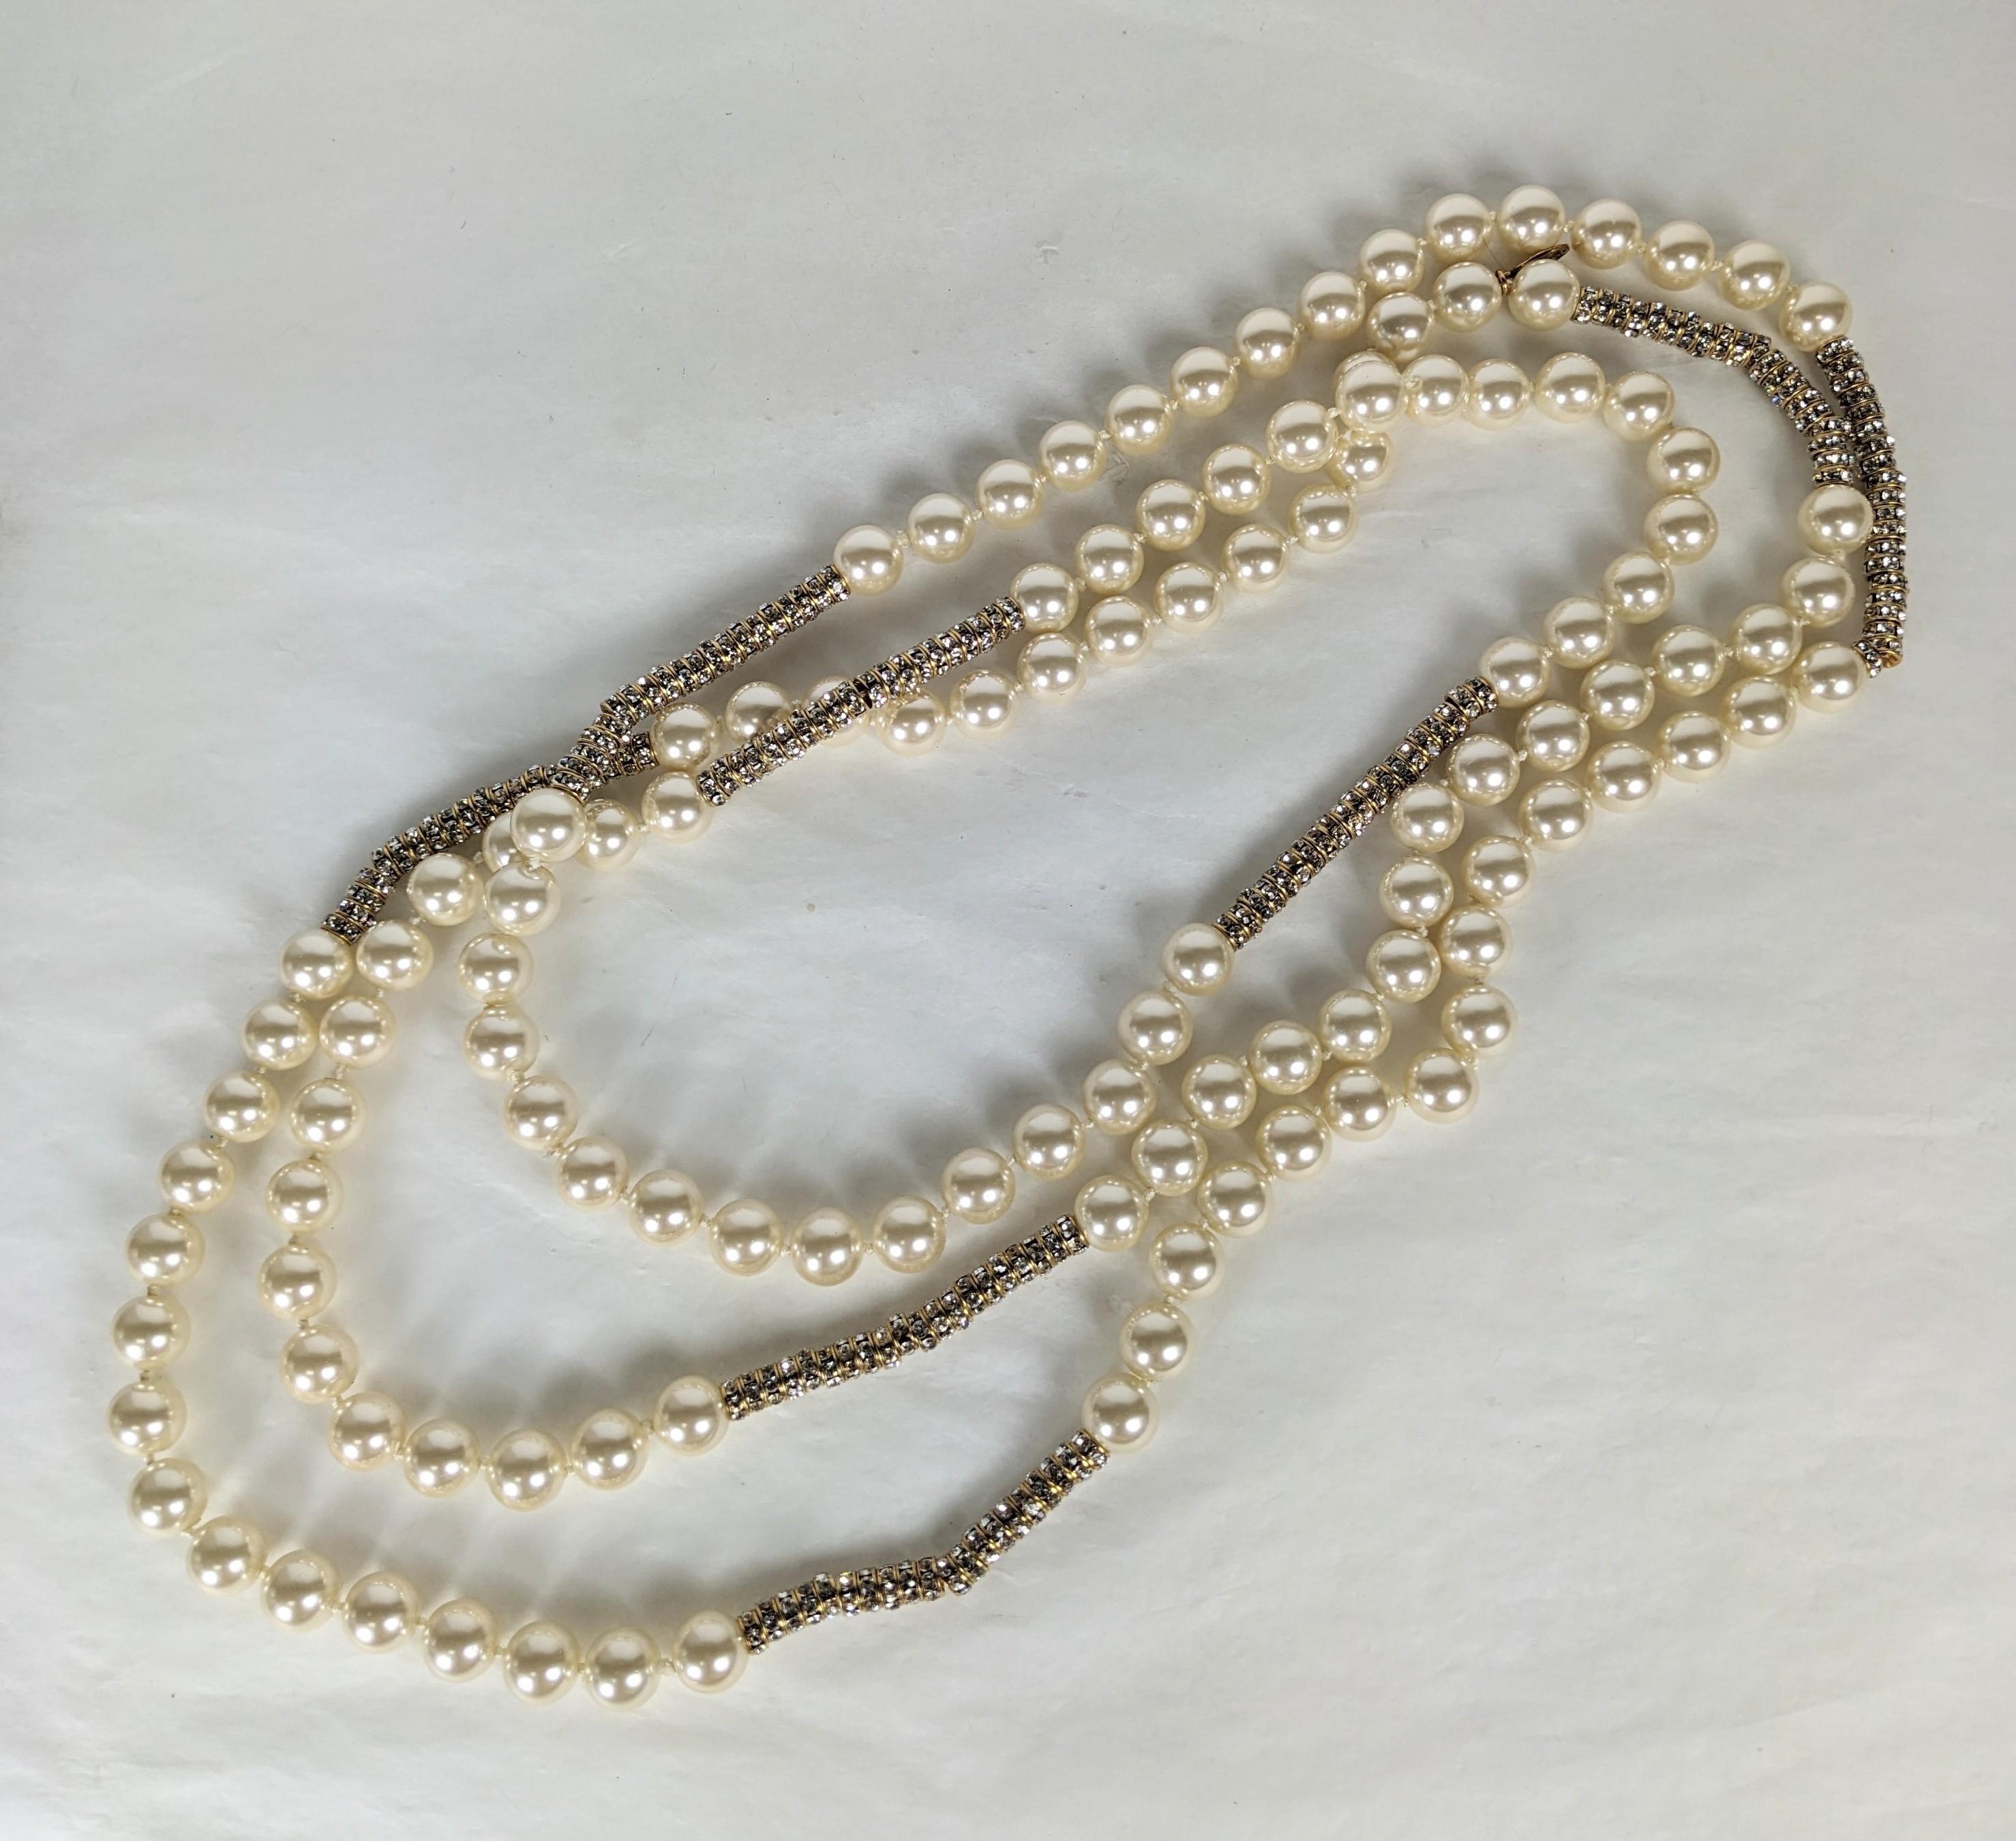 Super Rare and Versatile Chanel Endless Pearl and Crystal Rondel Necklace. Incredibly long and so versatile to wrap or wear singly. Hand knotted faux pearls with gilt bullion caps with hundreds of crystal set rondels. Approx 80